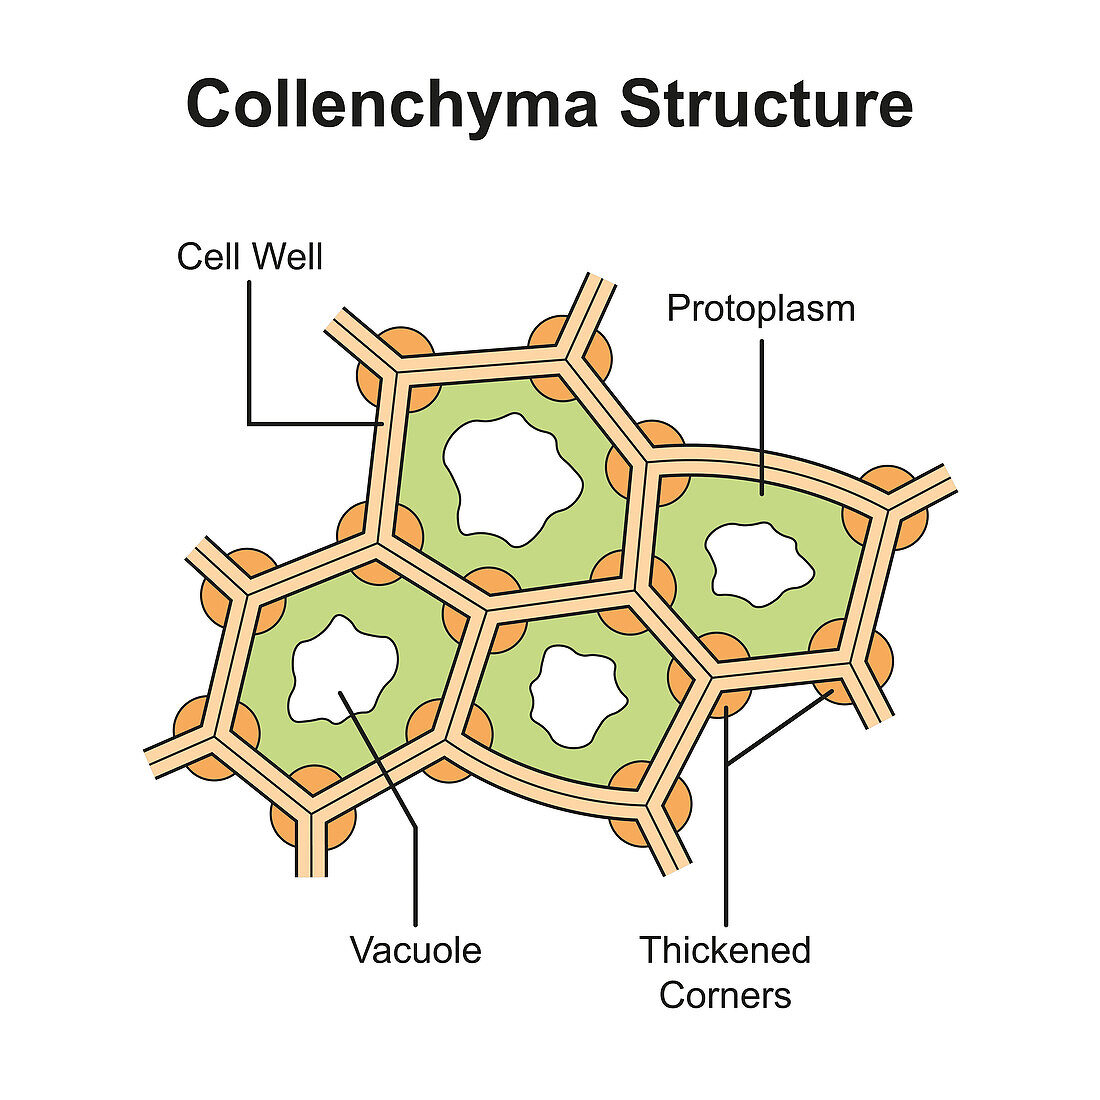 Collenchyma structure, illustration